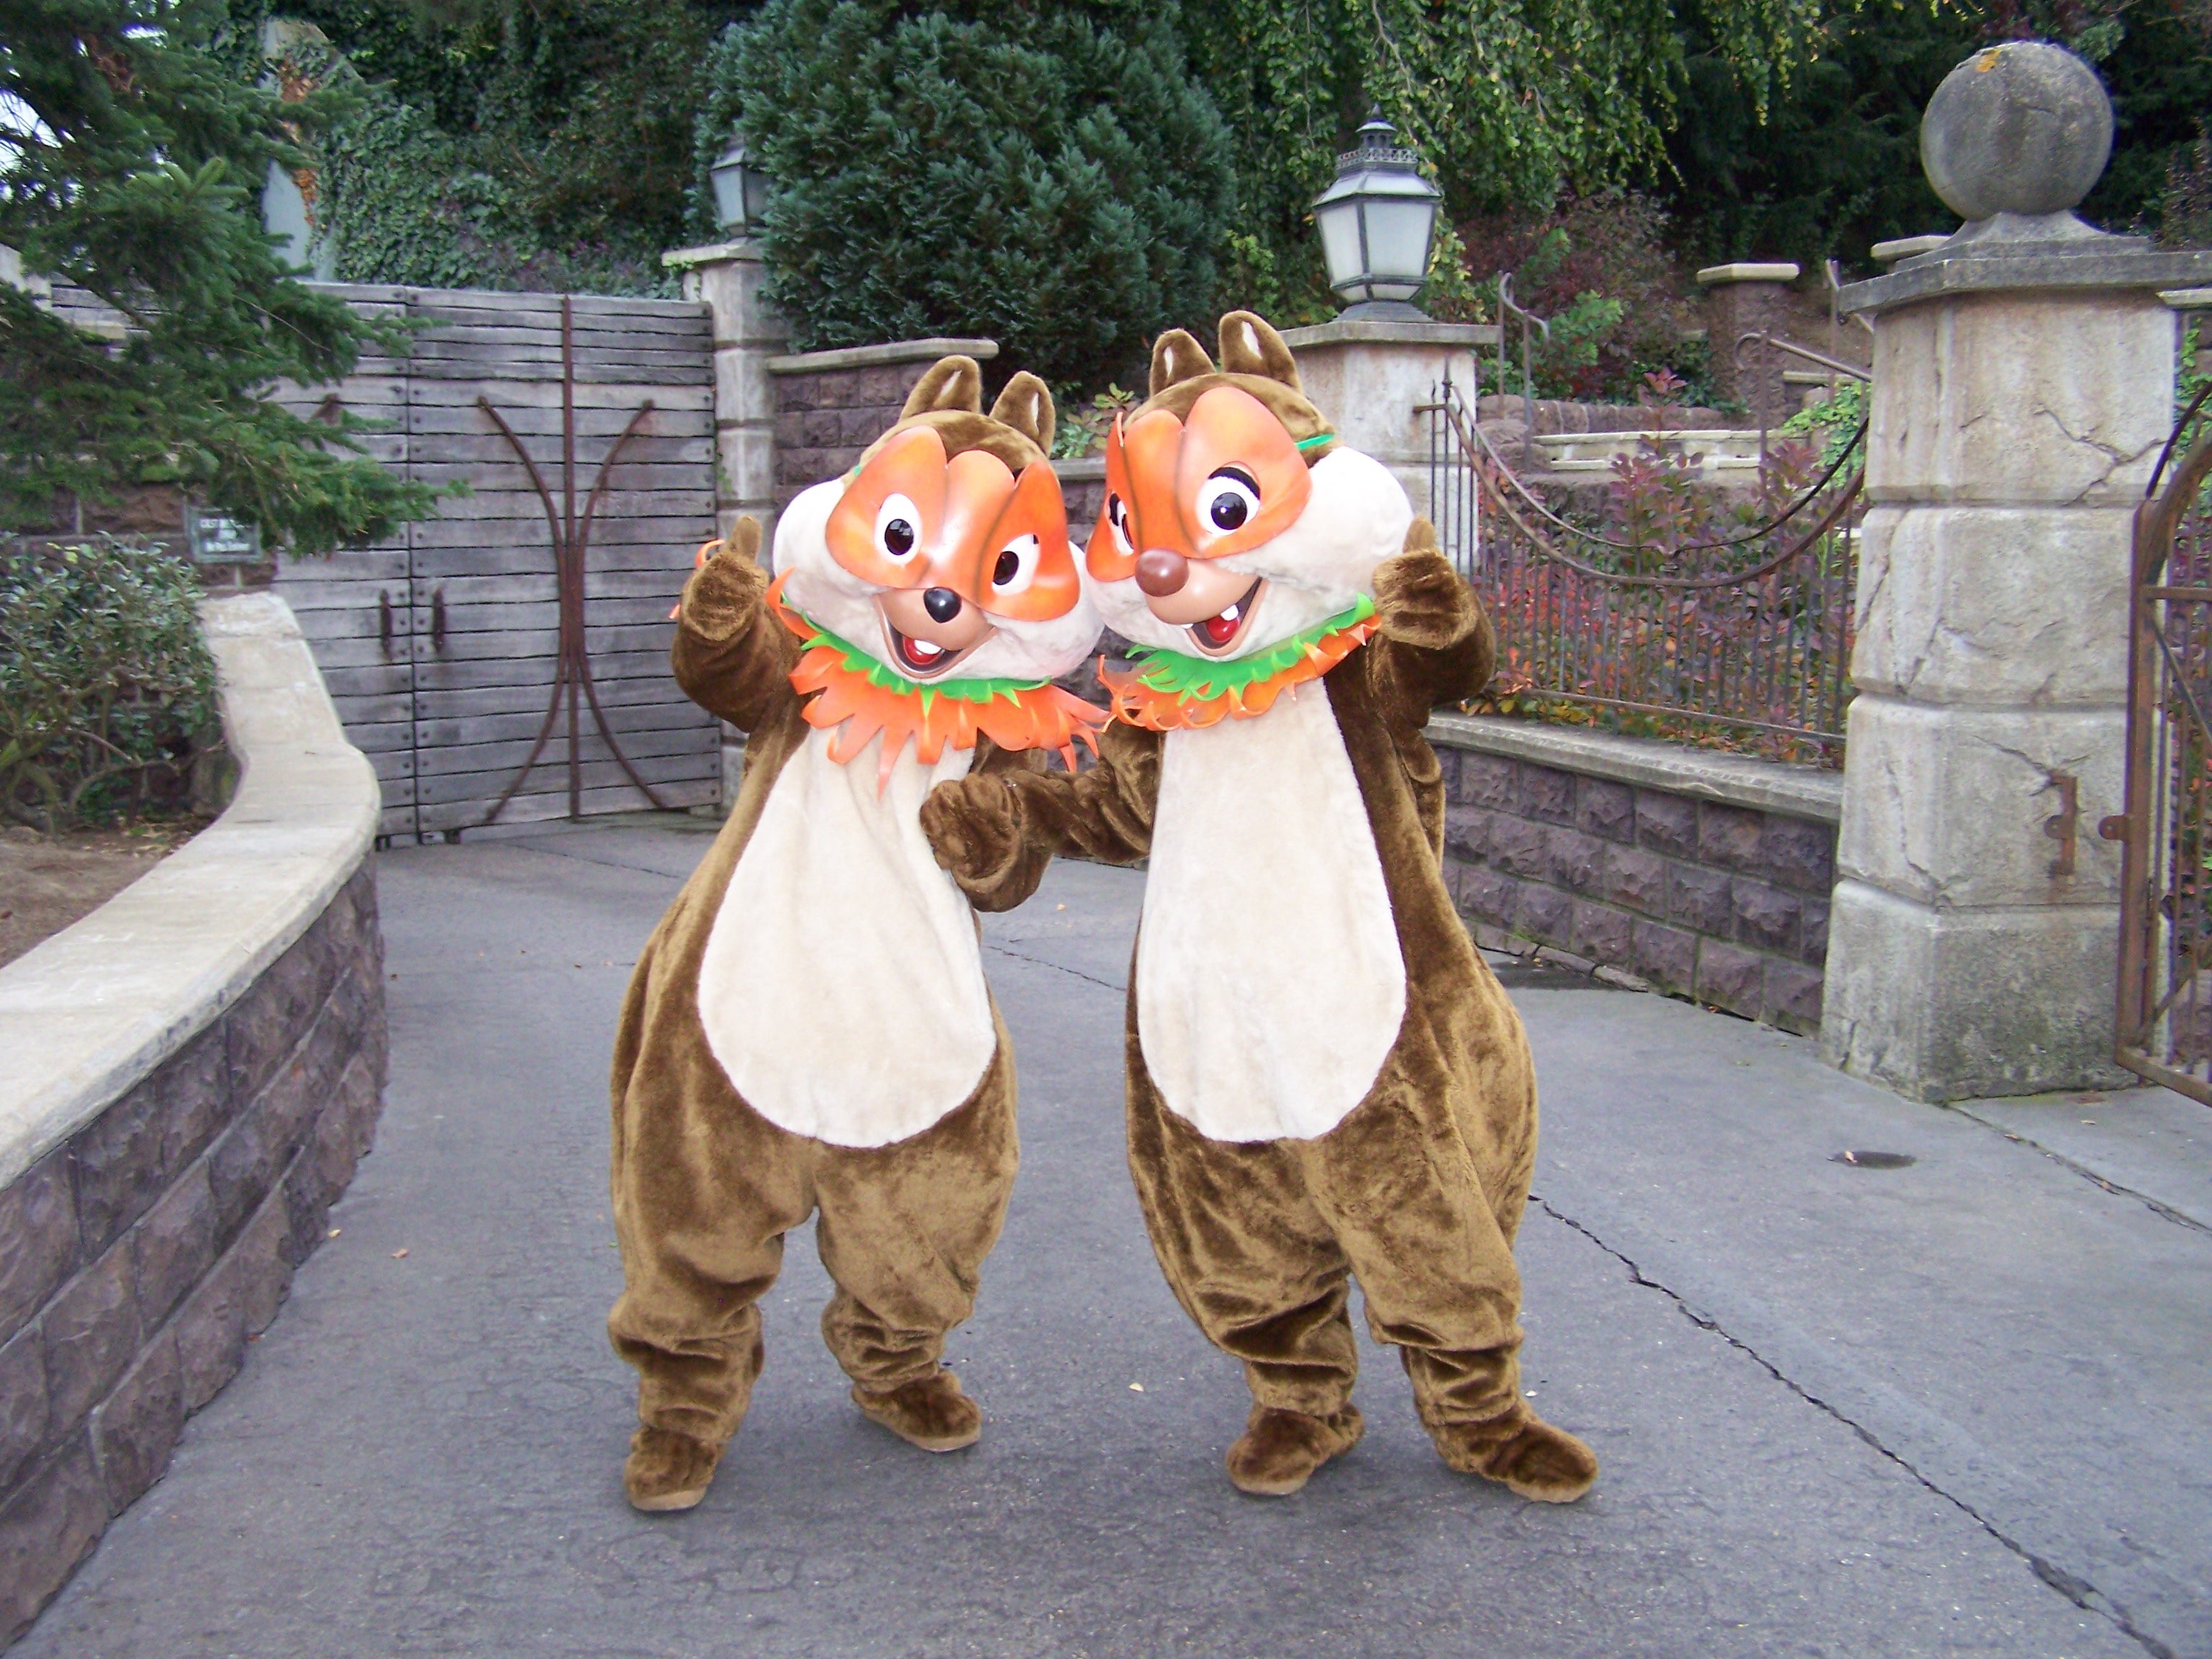 In 2007 Chip'n'Dale were meeting guests in front of Phantom Manor and got into Halloween by wearing these masks.